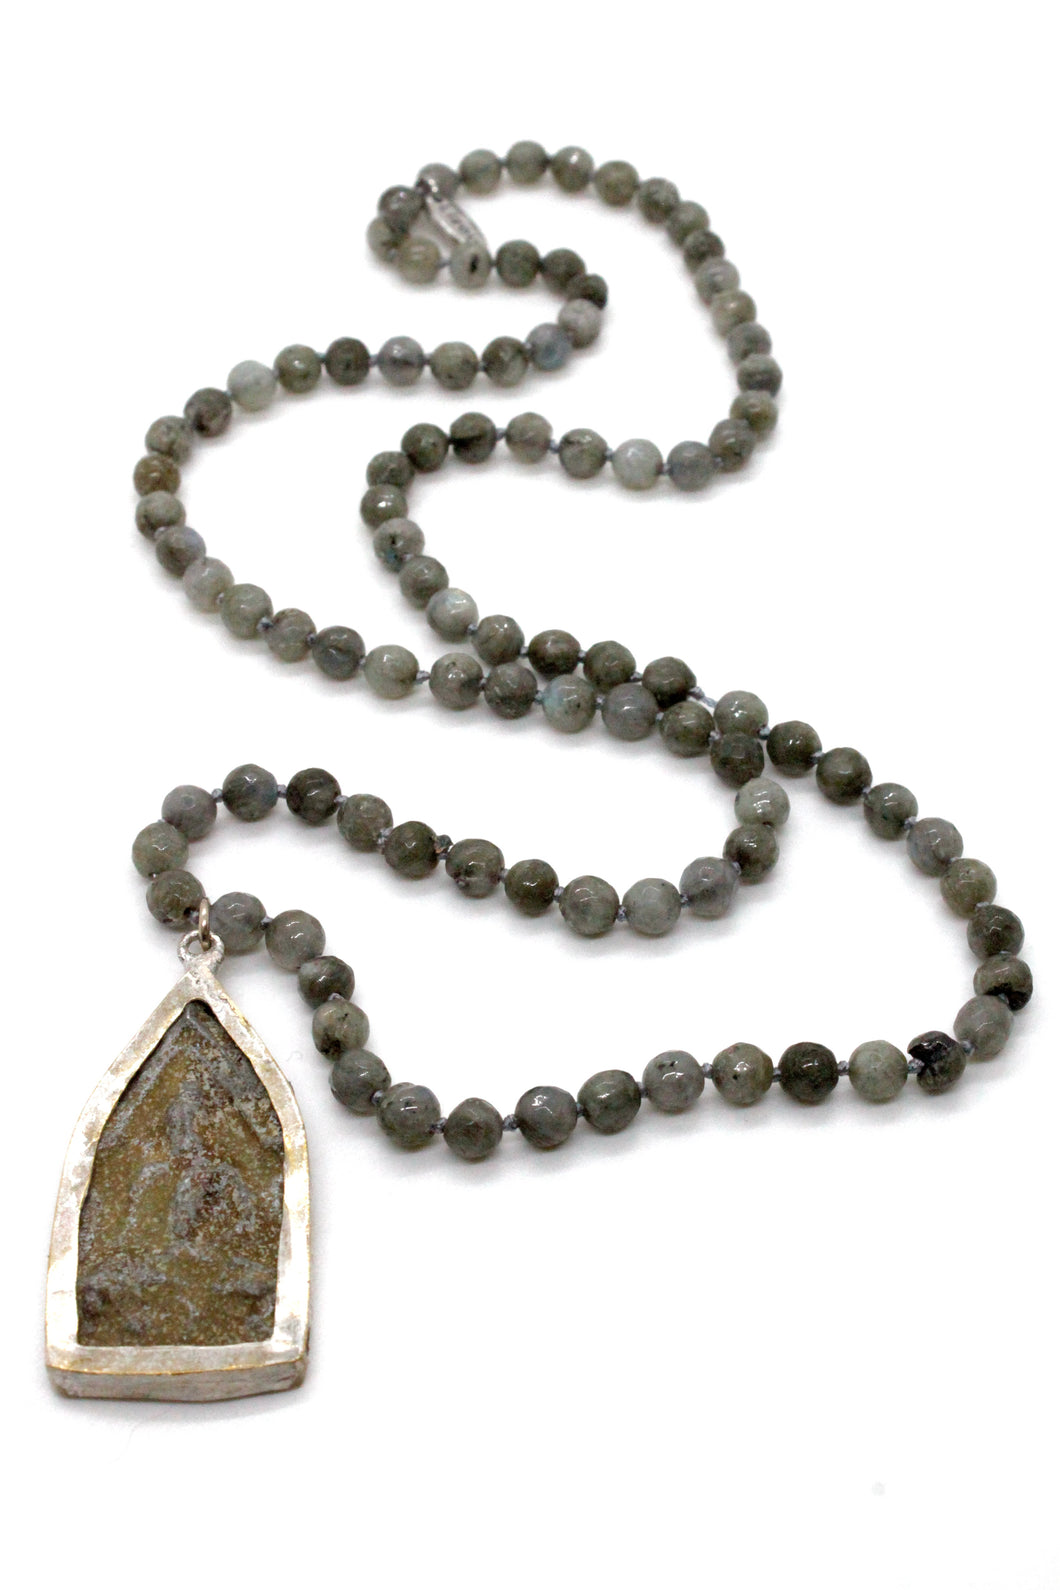 Hand Knotted Labradorite Necklace with Large Buddha Charm NL-LA-BB -The Buddha Collection-